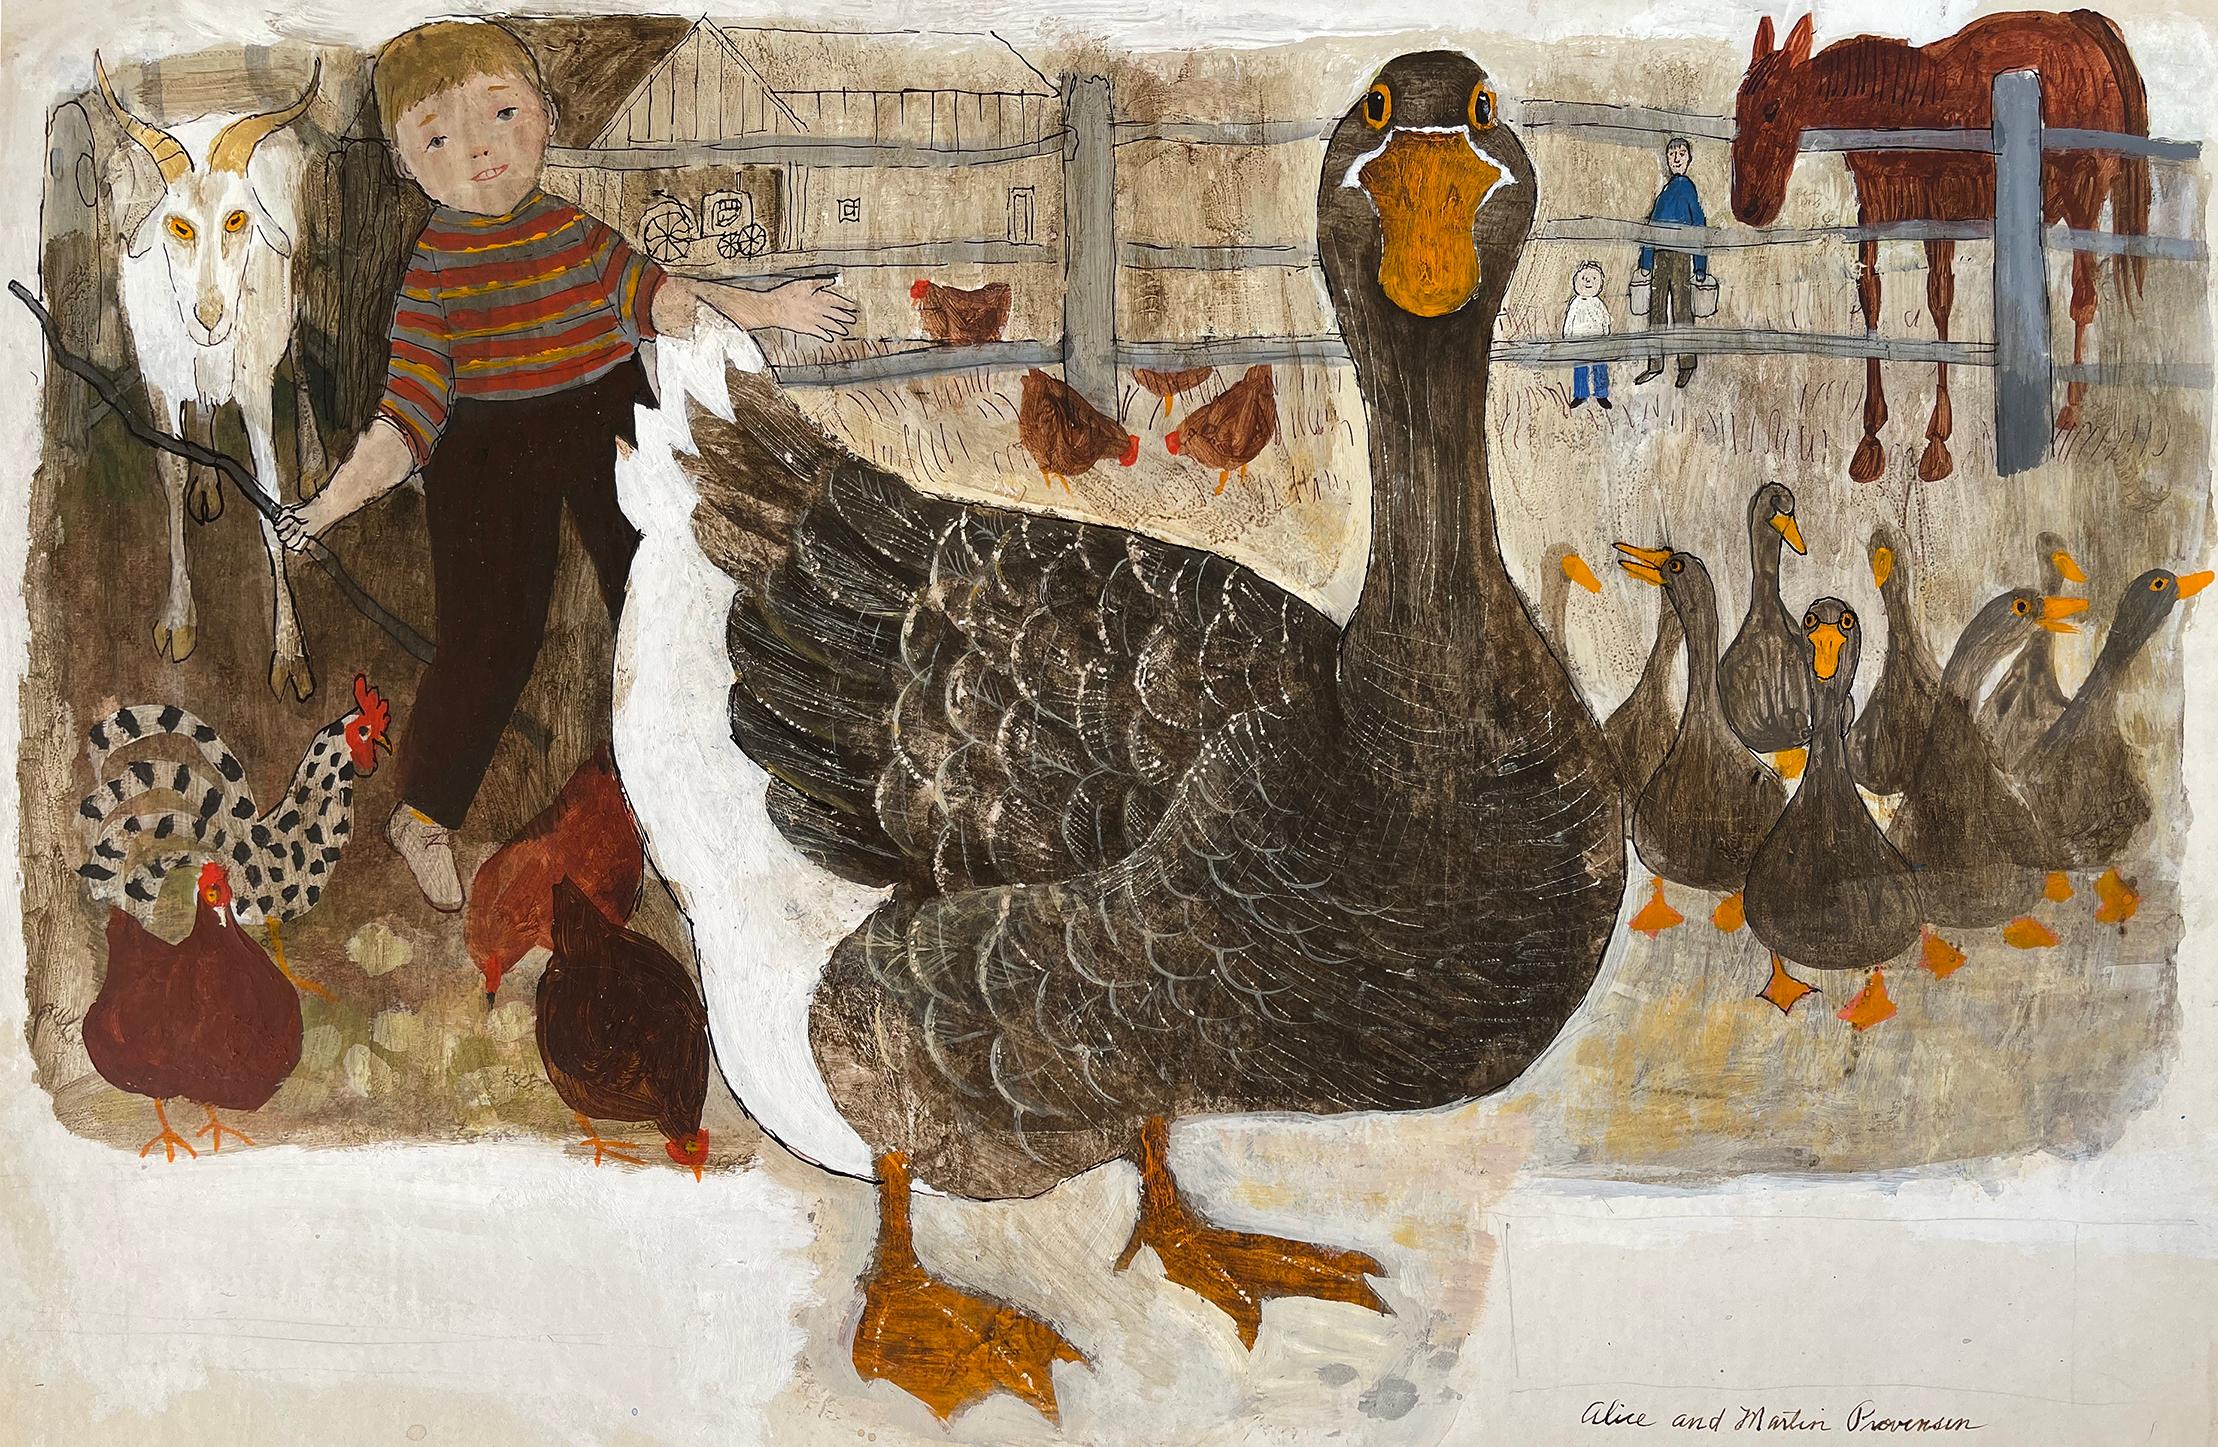 Duck in Farm with Horse, Goat and Chickens.  Children's book illustration